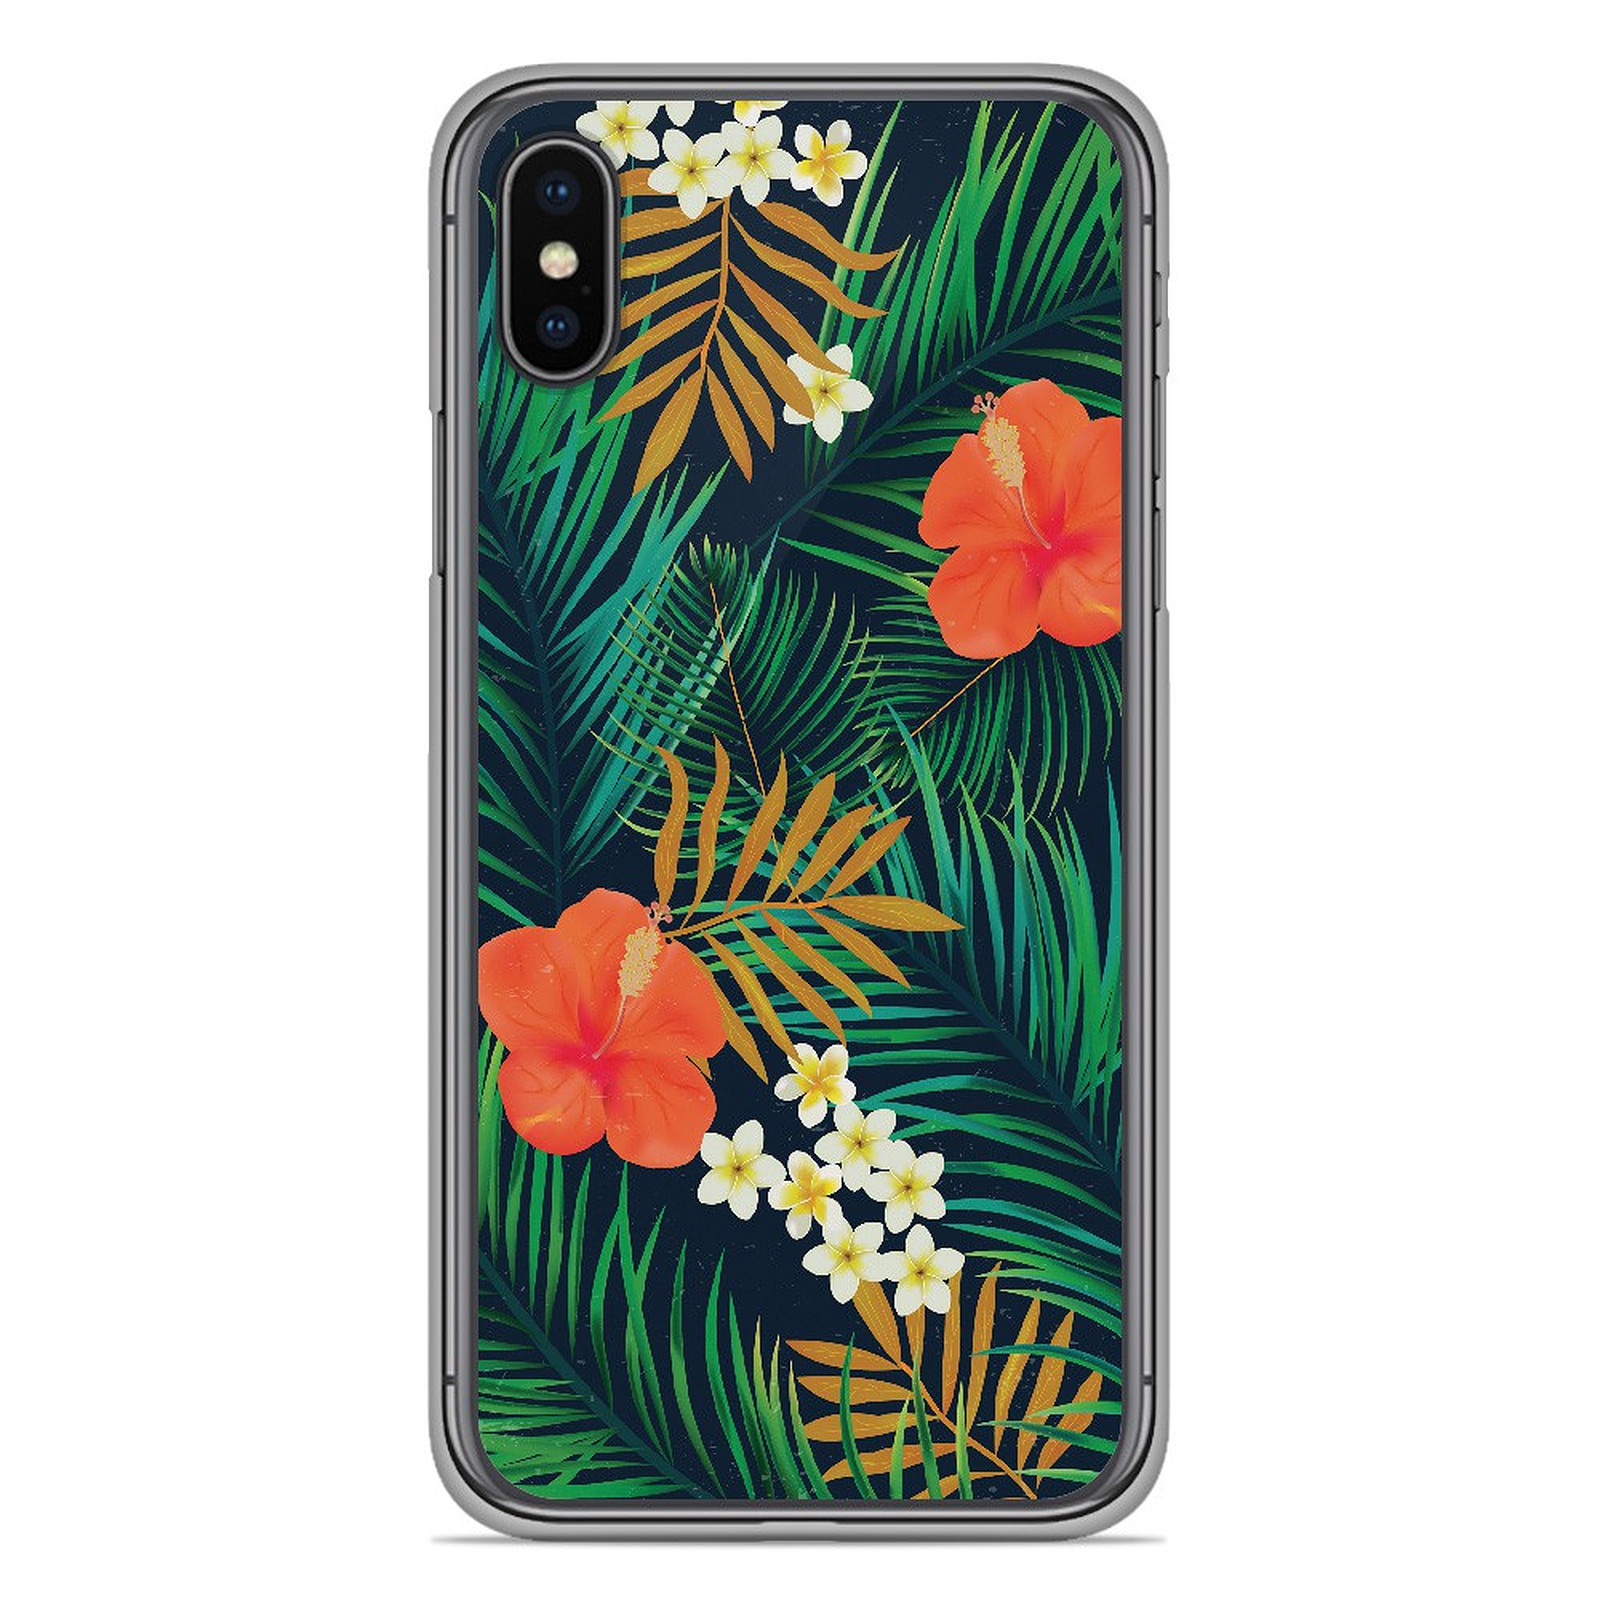 1001 Coques Coque silicone gel Apple iPhone XS Max motif Tropical - Coque telephone 1001Coques